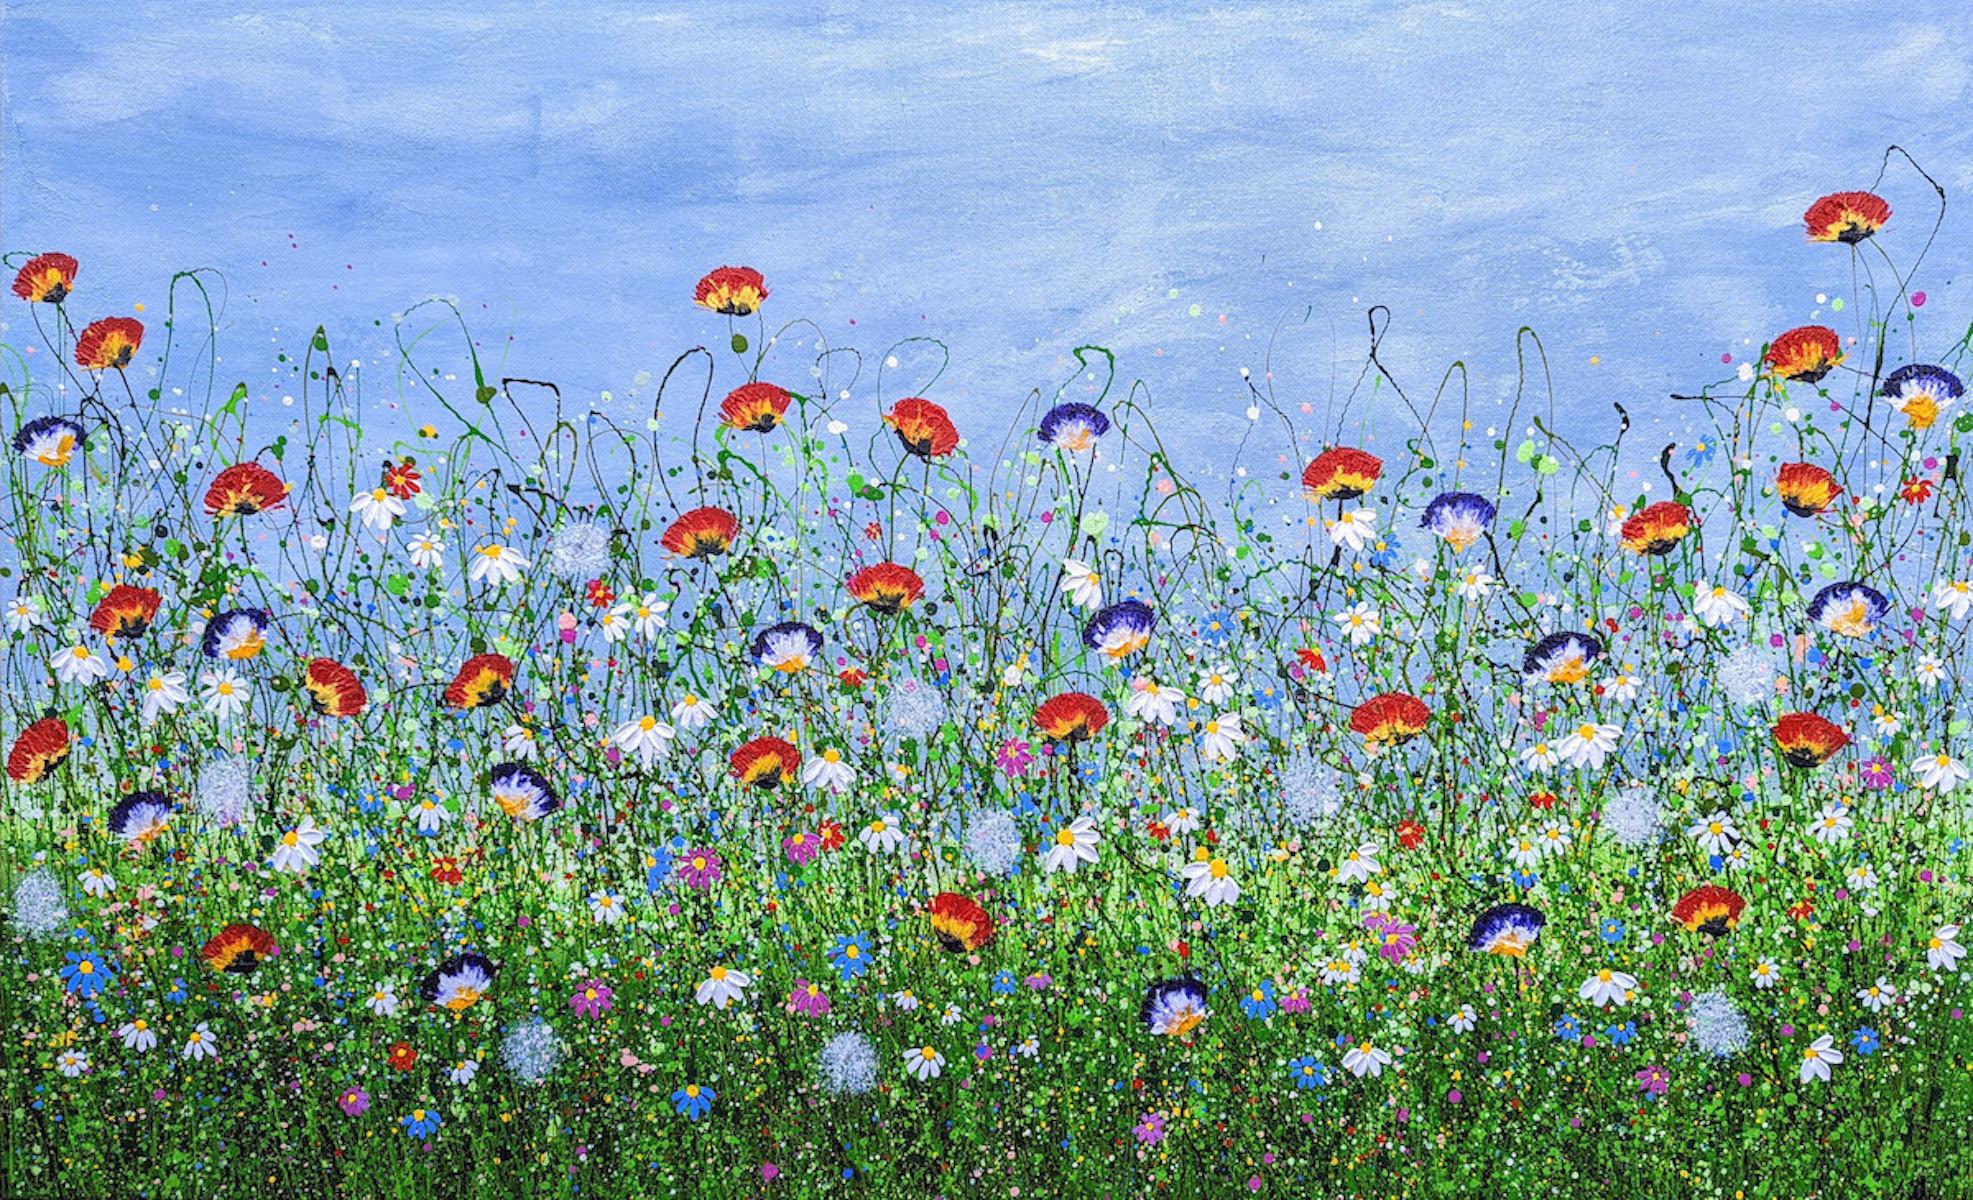 Where Wild Meadows Whisper #3 by Lucy Moore [2022]
original and hand signed by the artist 
Acrylic on canvas
Image size: H:67 cm x W:90 cm
Complete Size of Unframed Work: H:67 cm x W:90 cm x D:1.9cm
Sold Unframed
Please note that insitu images are